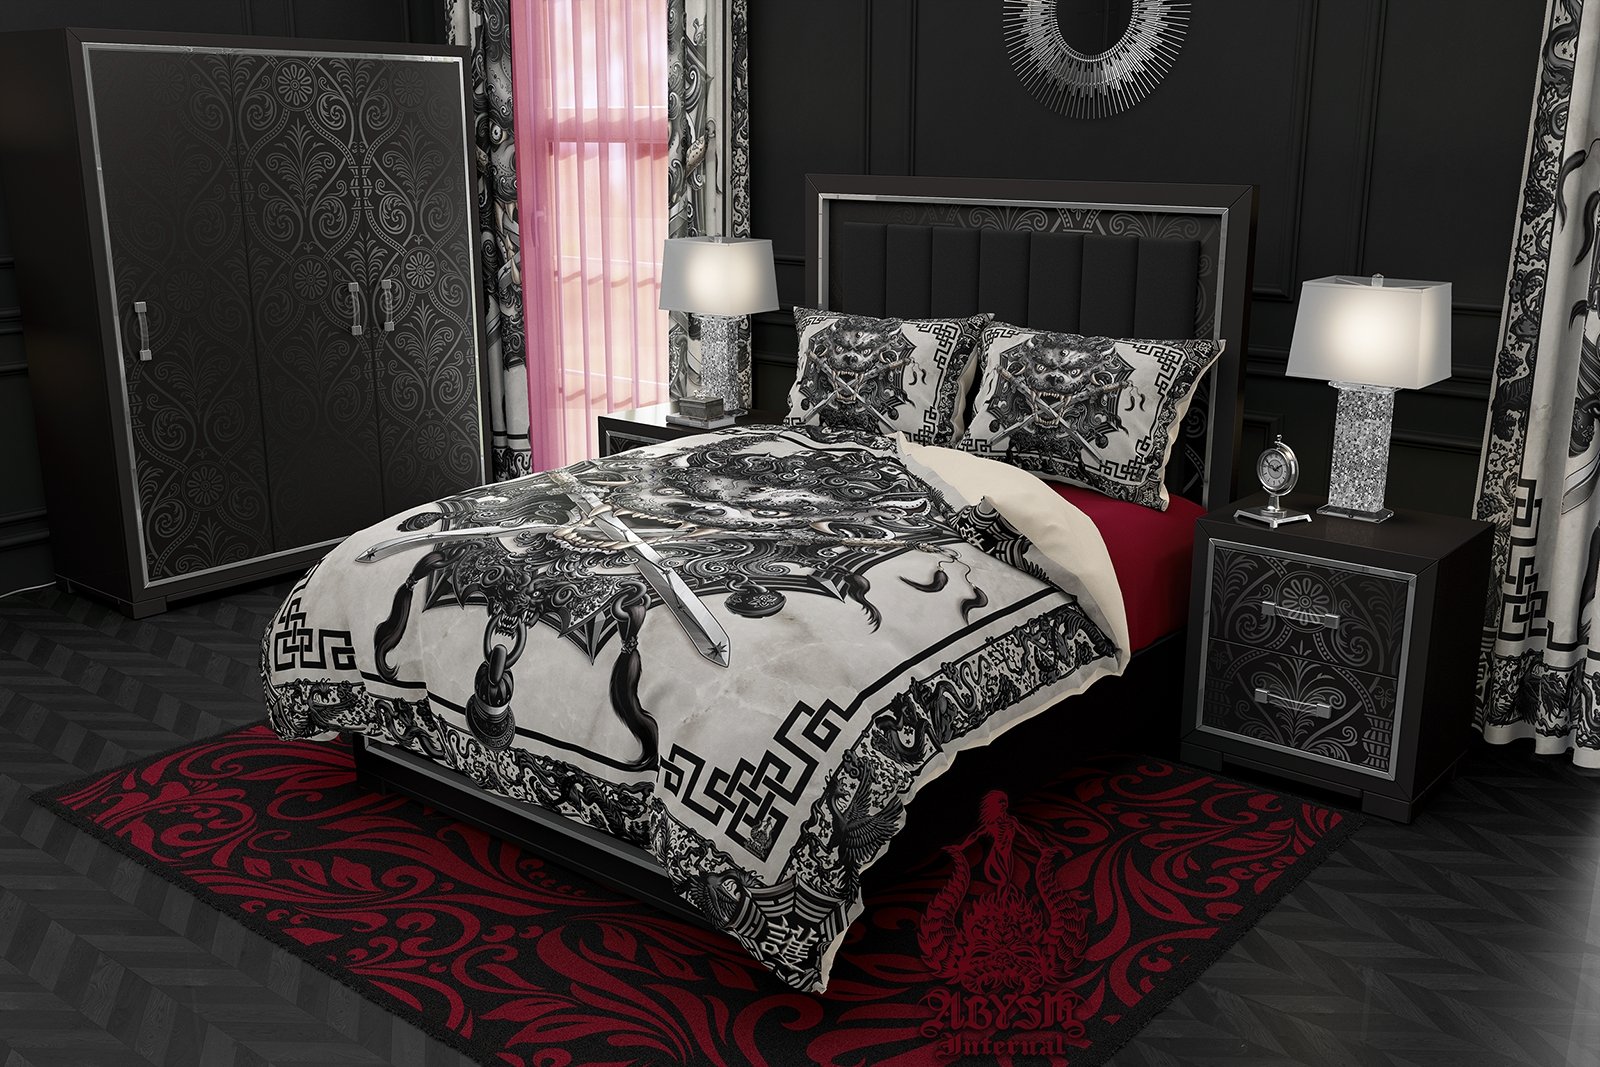 Asian Lion Bedding Set, Comforter and Duvet, Taiwan Sword Lion, Chinese Bed Cover, Gamer Bedroom, Alternative Decor, King, Queen and Twin Size - Black & White Goth - Abysm Internal